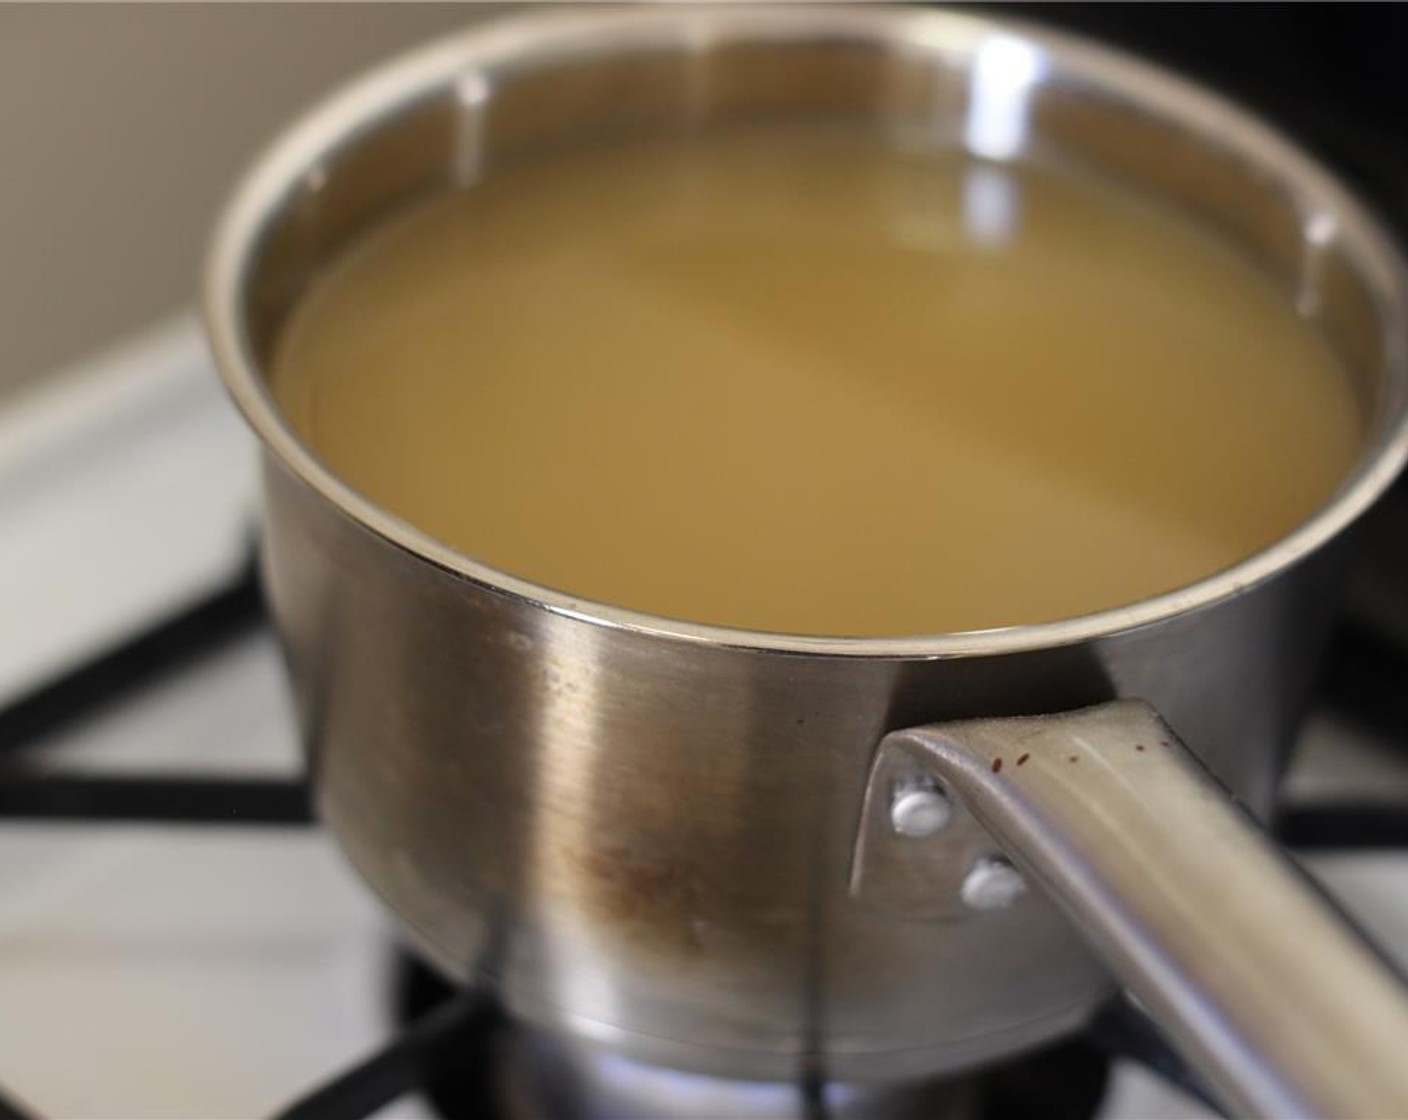 step 7 Heat the Chicken Broth (4 cups) in a pot over low heat. Place a stainless steel baking rack on top of a baking sheet. Spray it with cooking spray.